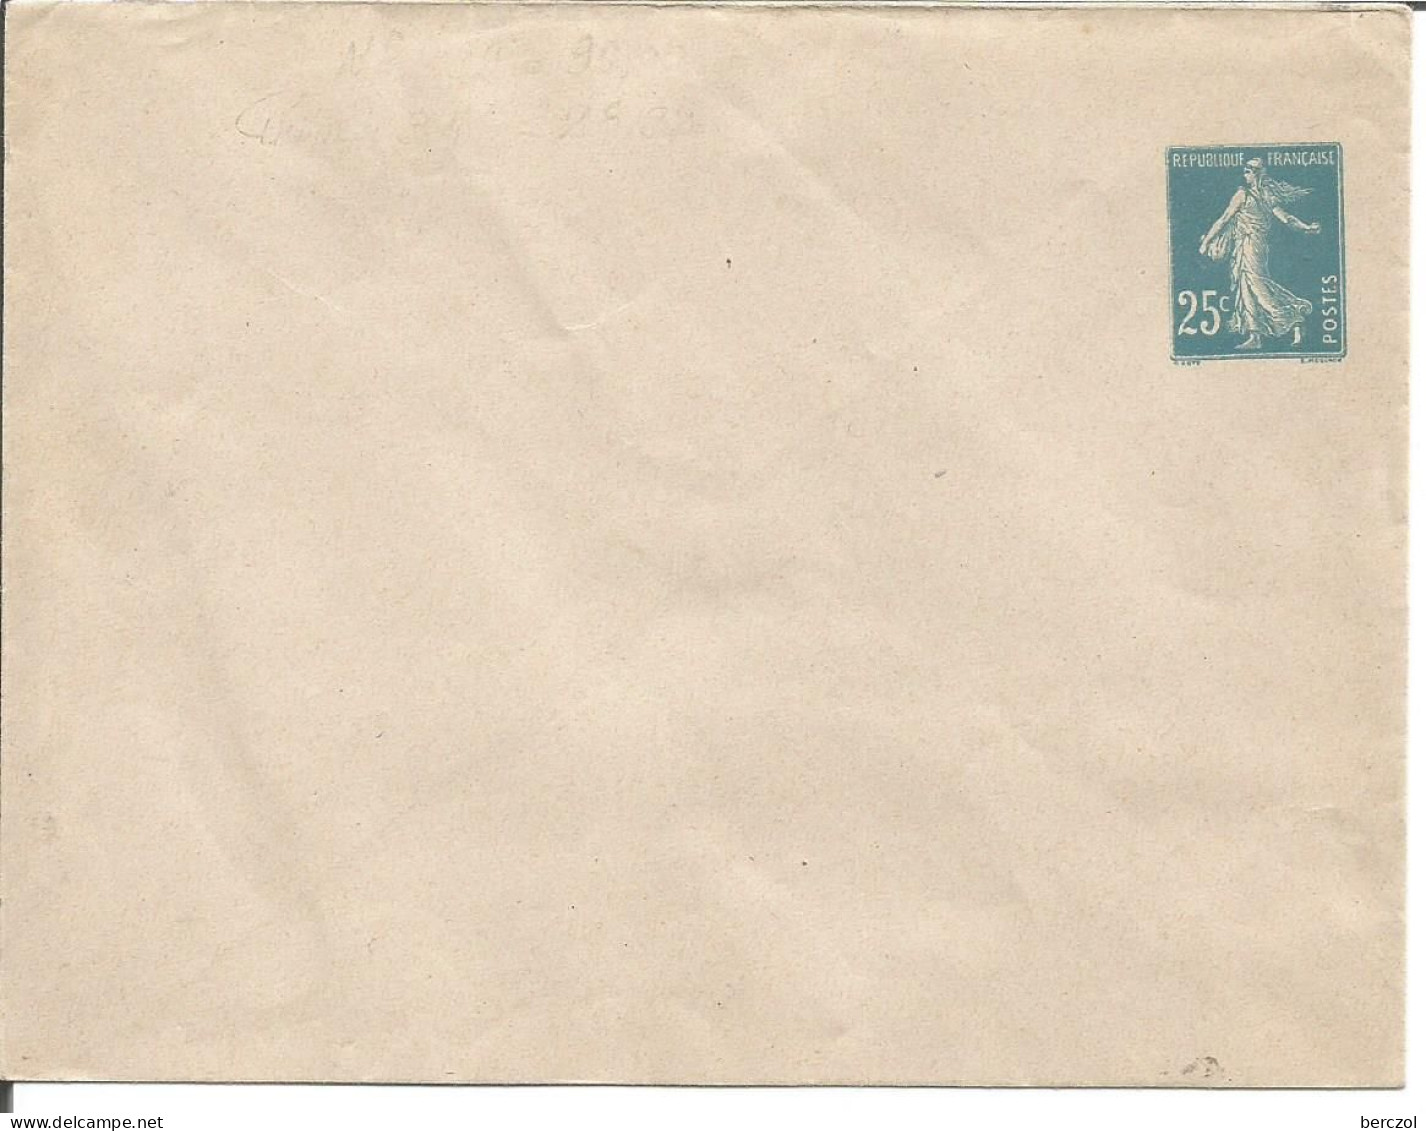 FRANCE ANNEE1907/1939 ENTIER TYPE SEMEUSE CAMEE N° 140 E2 NEUF** TB COTE 15,00 € - Standard Covers & Stamped On Demand (before 1995)